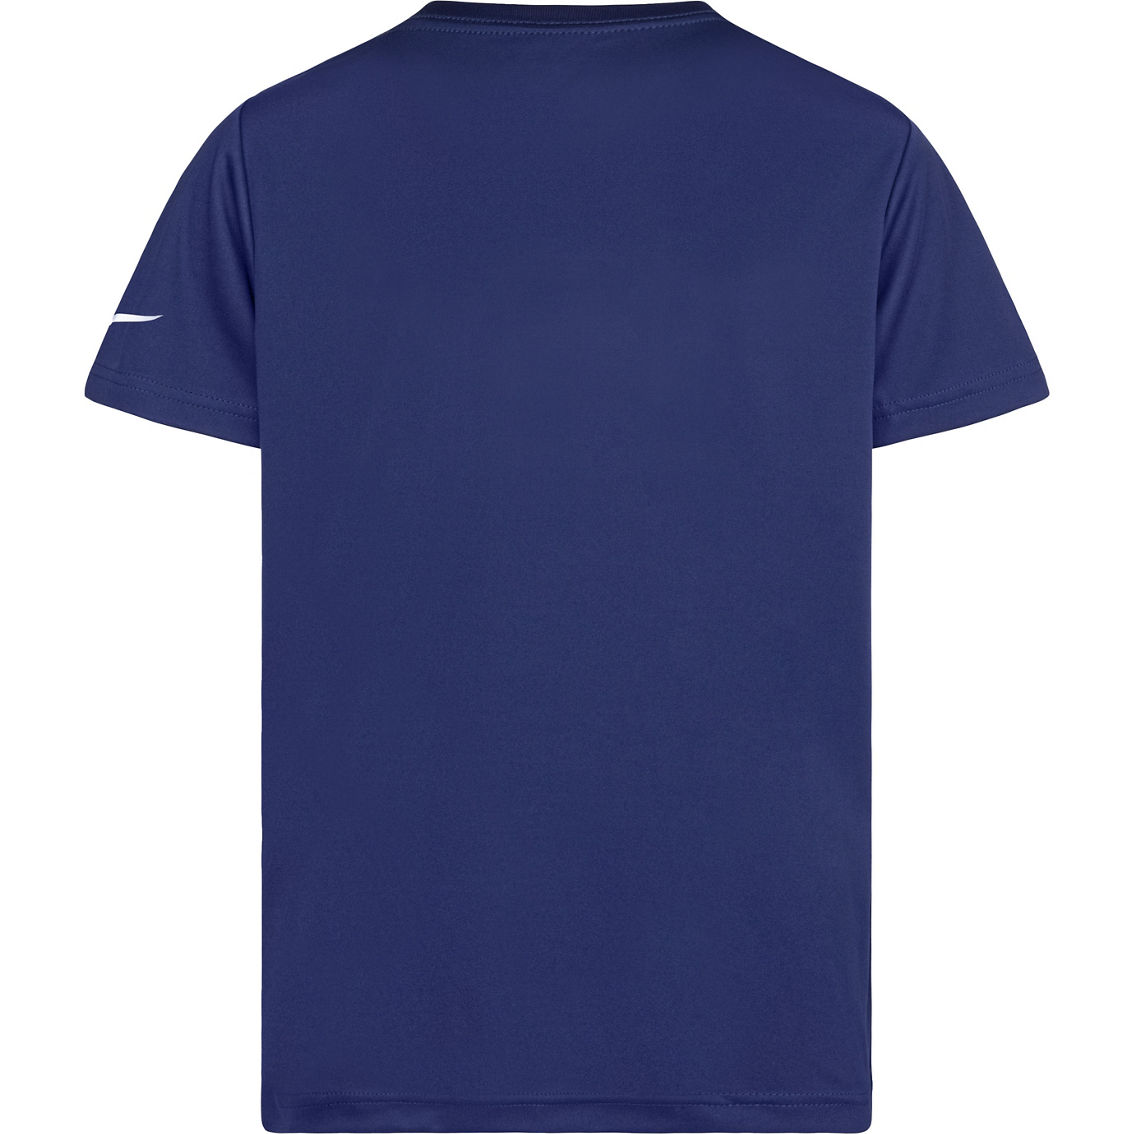 3BRAND by Russell Wilson Boys Dual Logo Dri-Fit Tee - Image 2 of 3